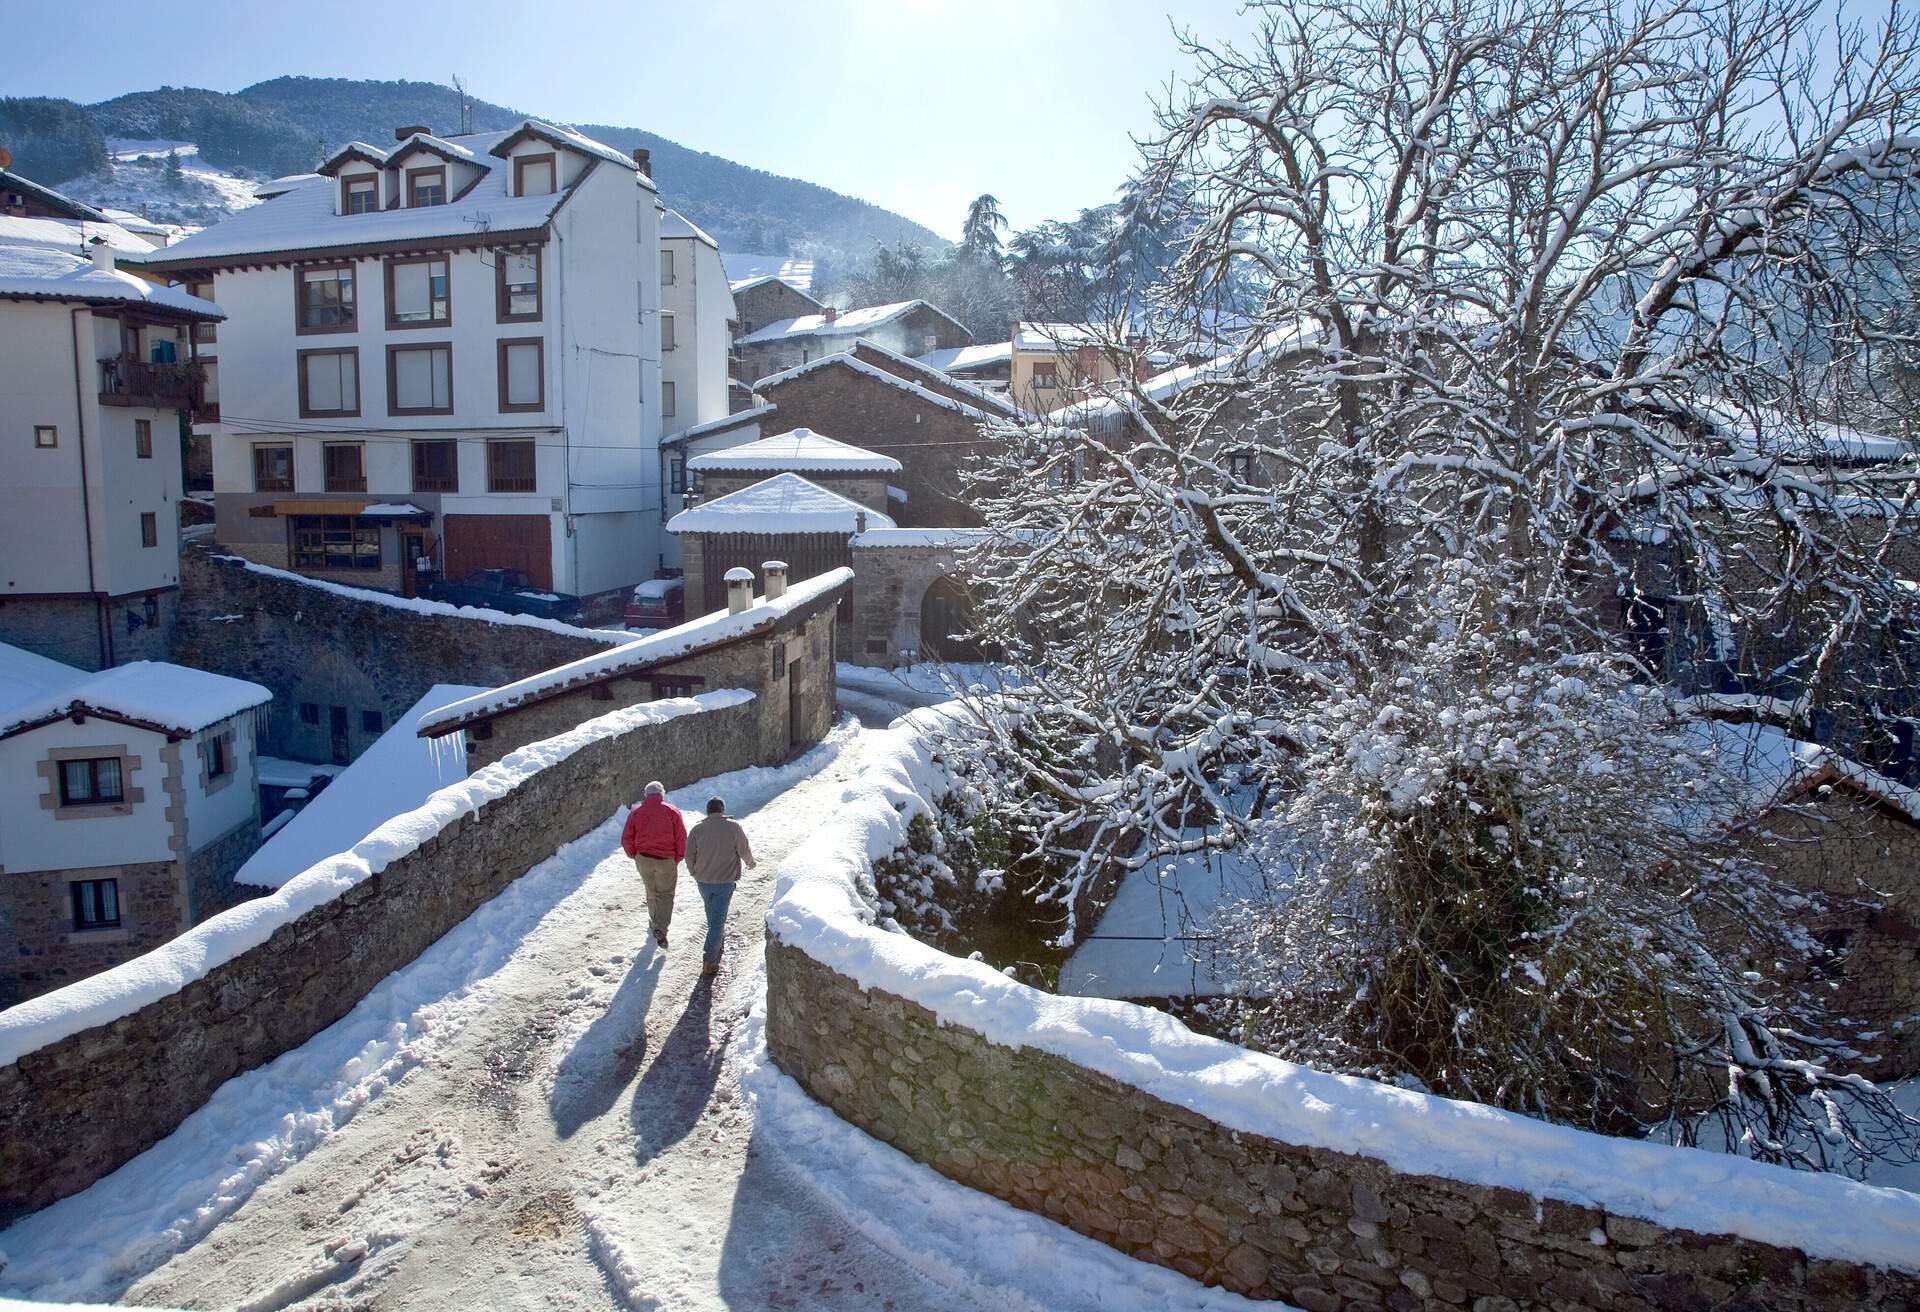 People crossing the old bridge in the town of Potes in the town of Liebana belonging to the Autonomous Community of Cantabria neighborhood close to the Picos de Europa, Spain.